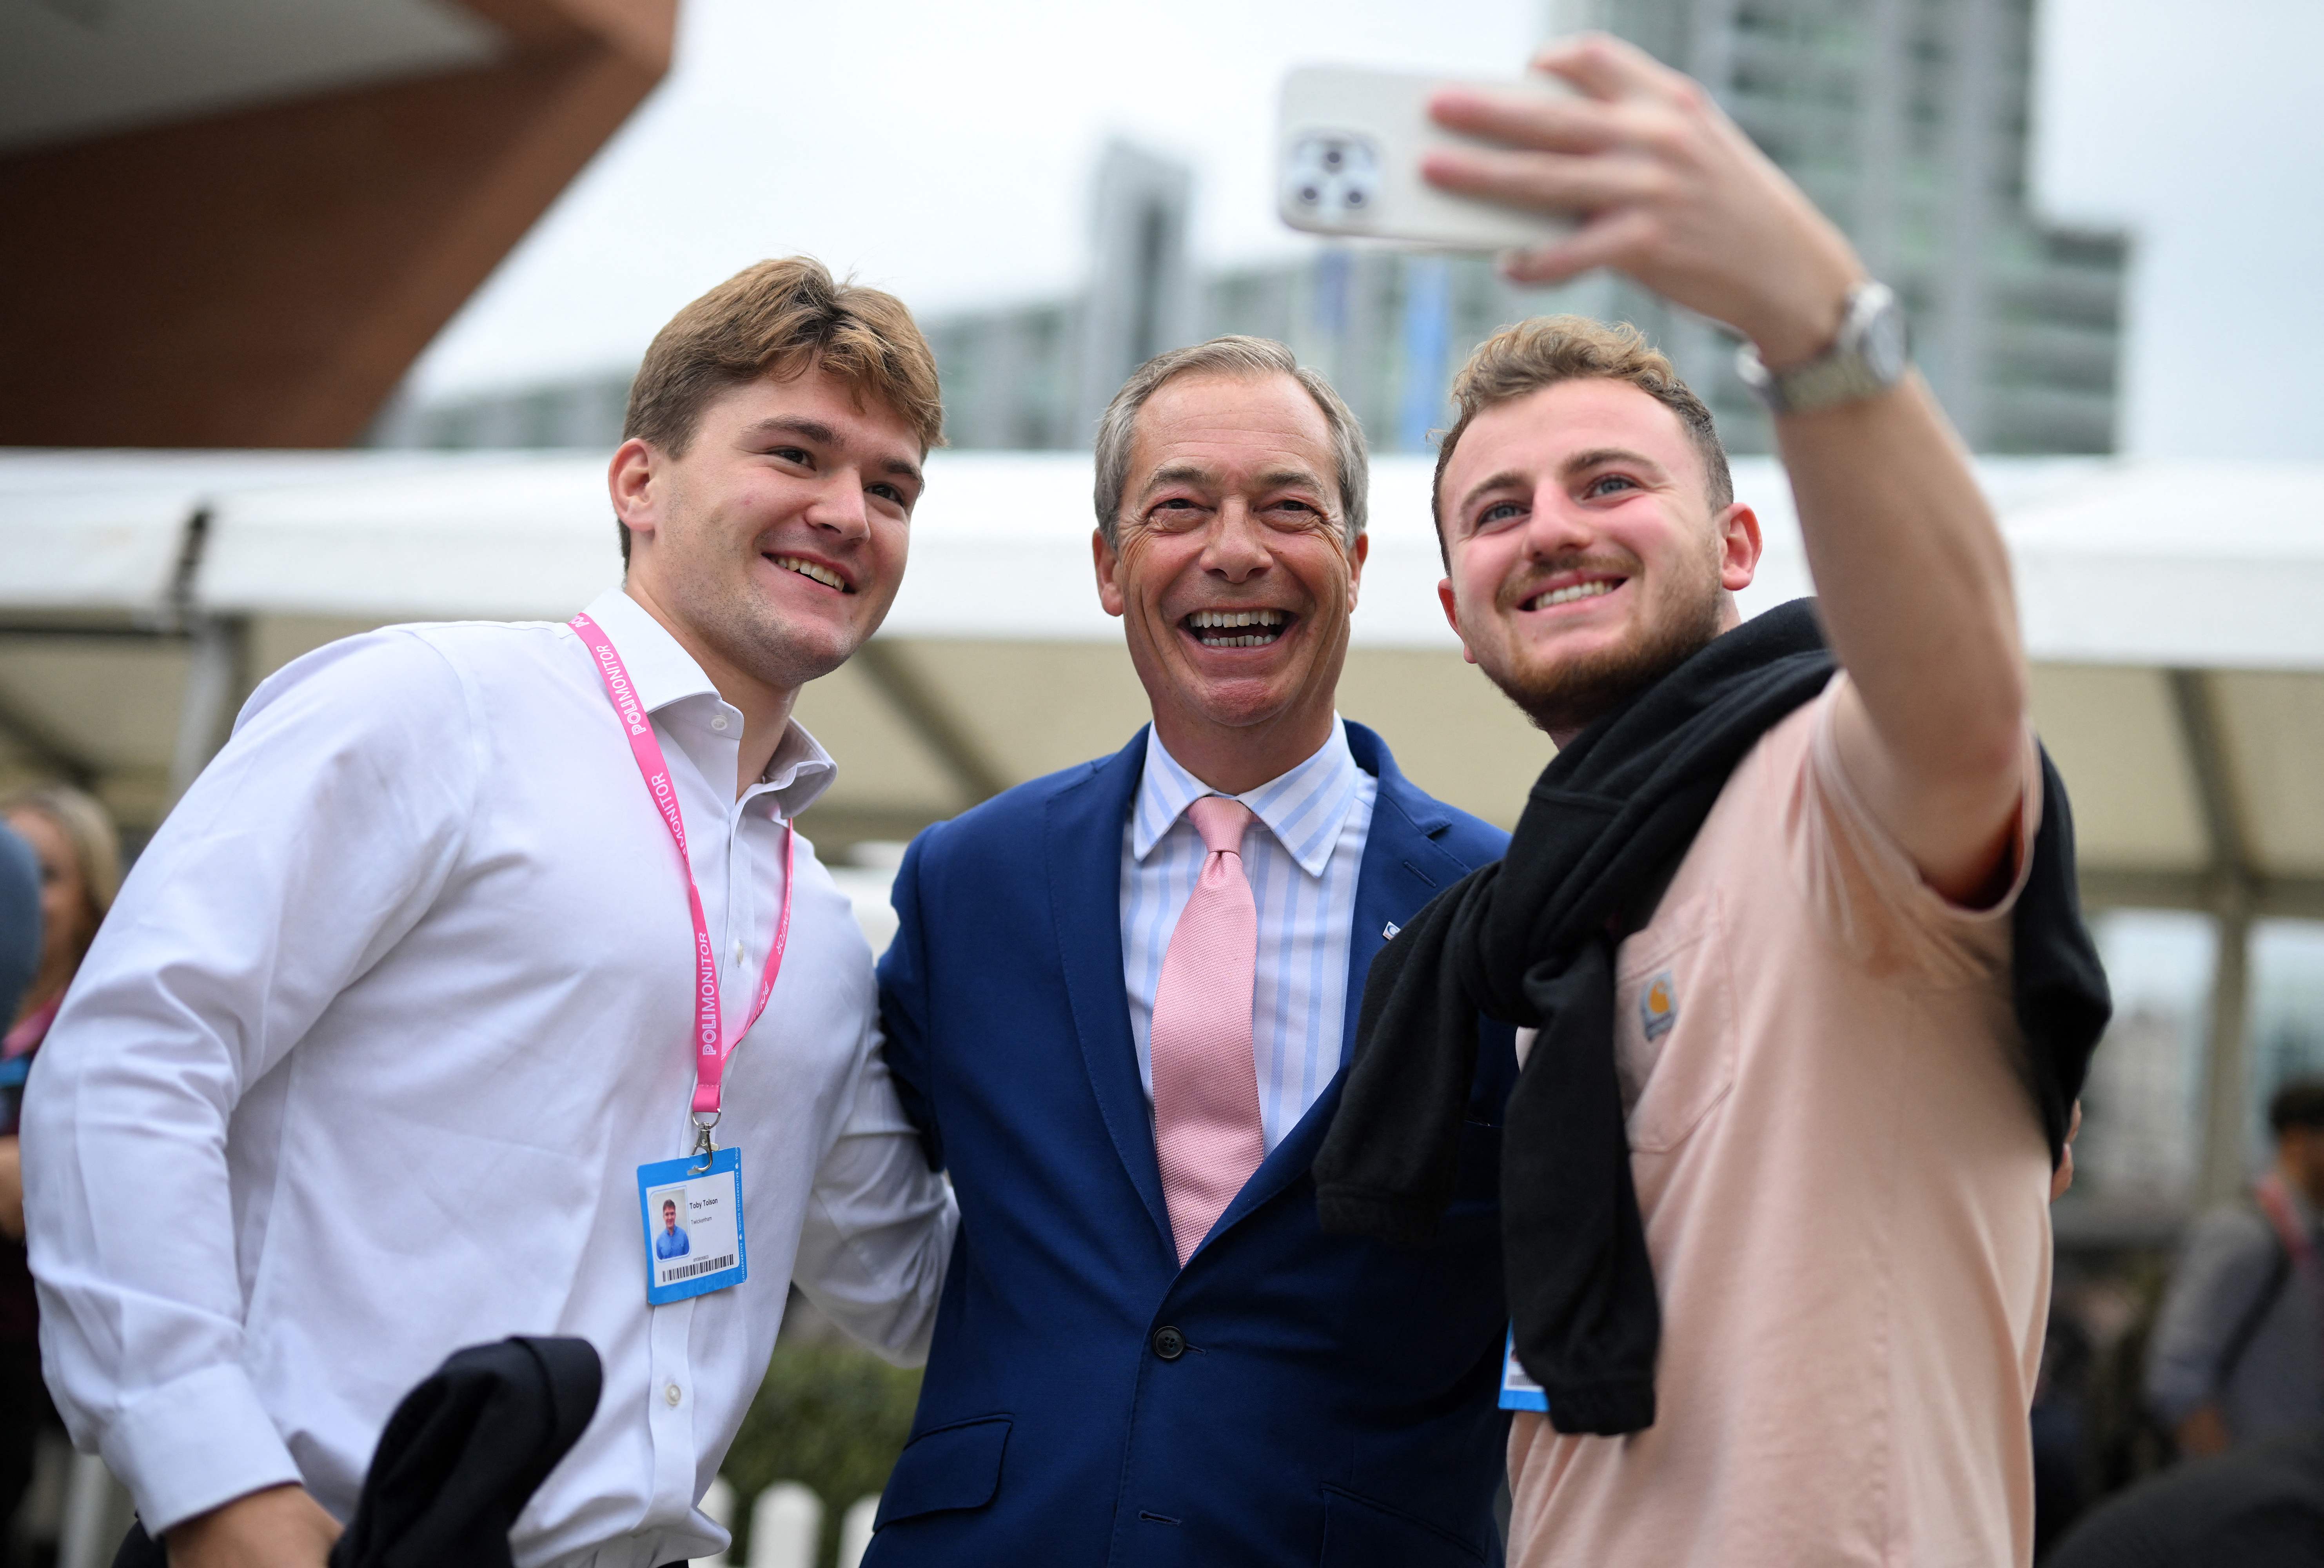 Delegates at the Tory conference pose with Nigel Farage in Manchester